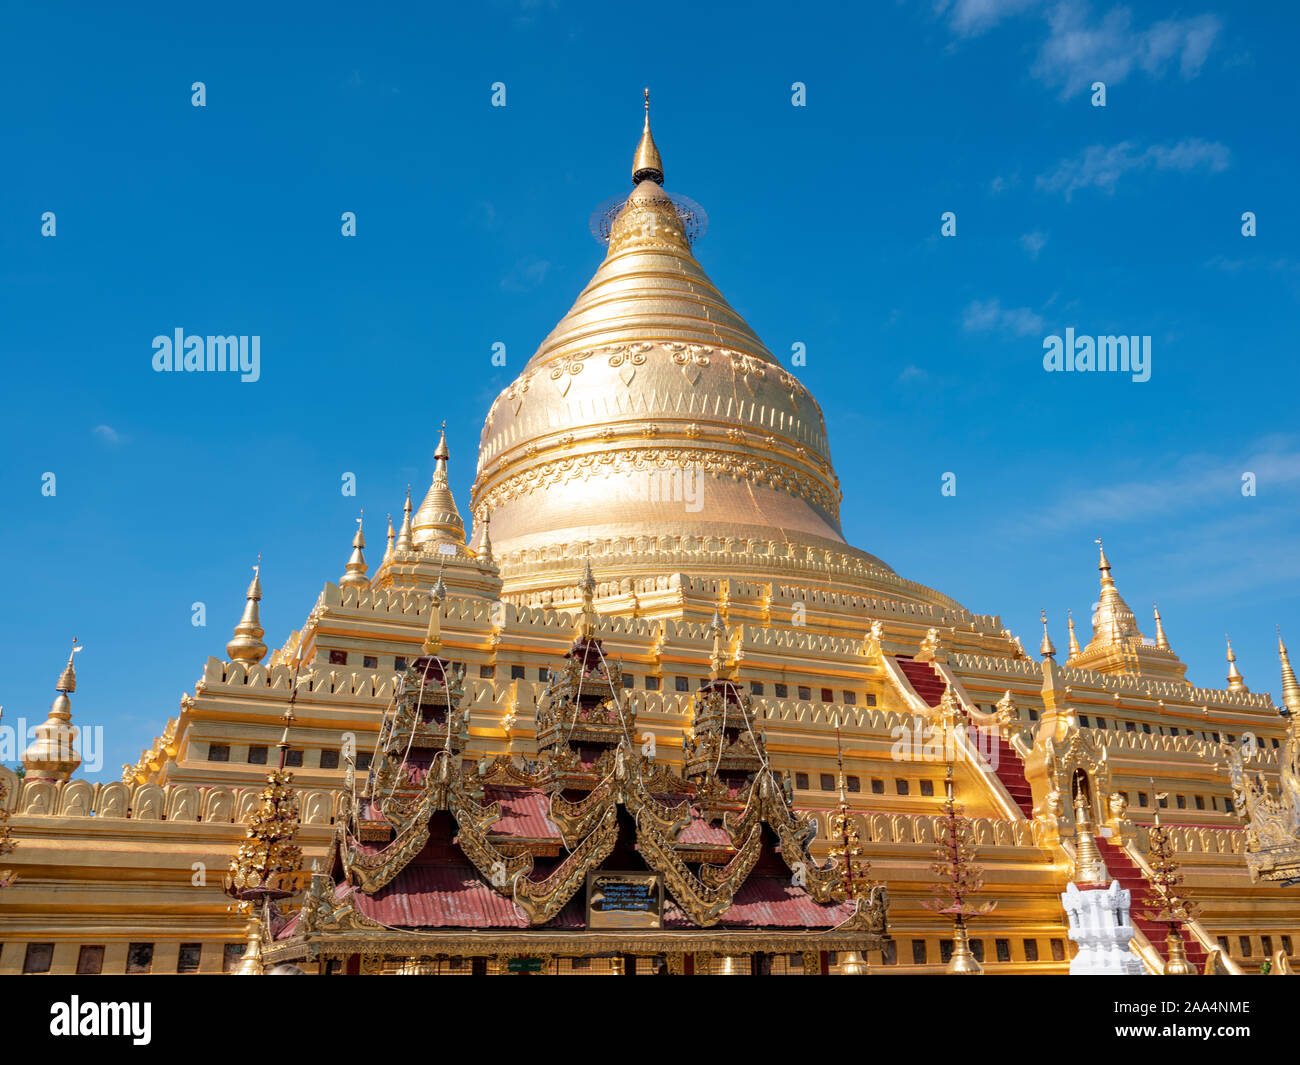 The gold leafed gilded stupa of the Shwezigon Pagoda finished in the 12th century and situated in Bagan (Pagan), Myanmar (Burma) Stock Photo